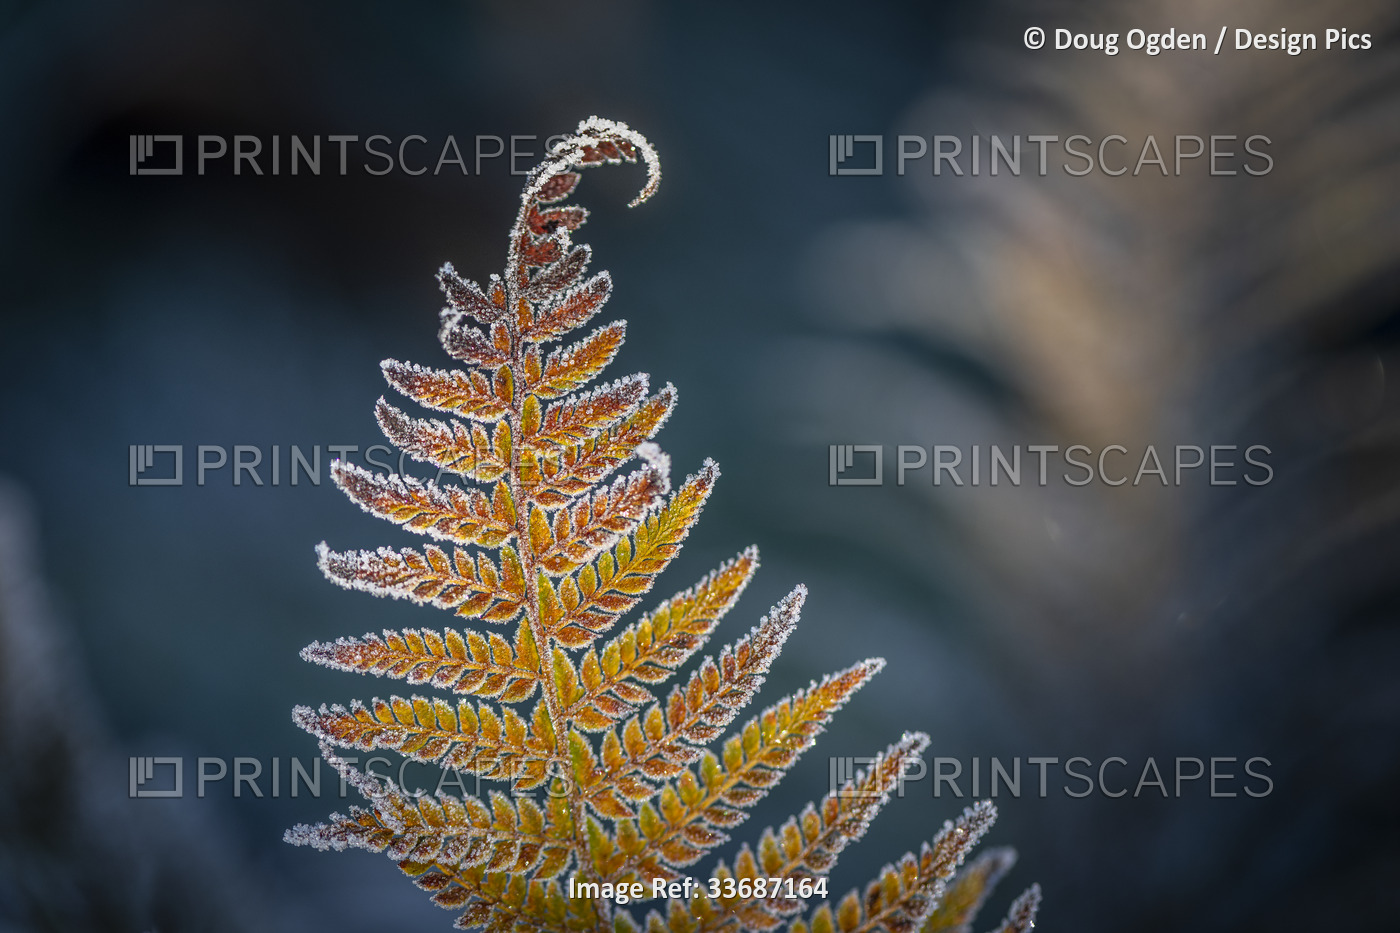 Detail of a Frosted Sword Fern; Olympia, Washington, United States